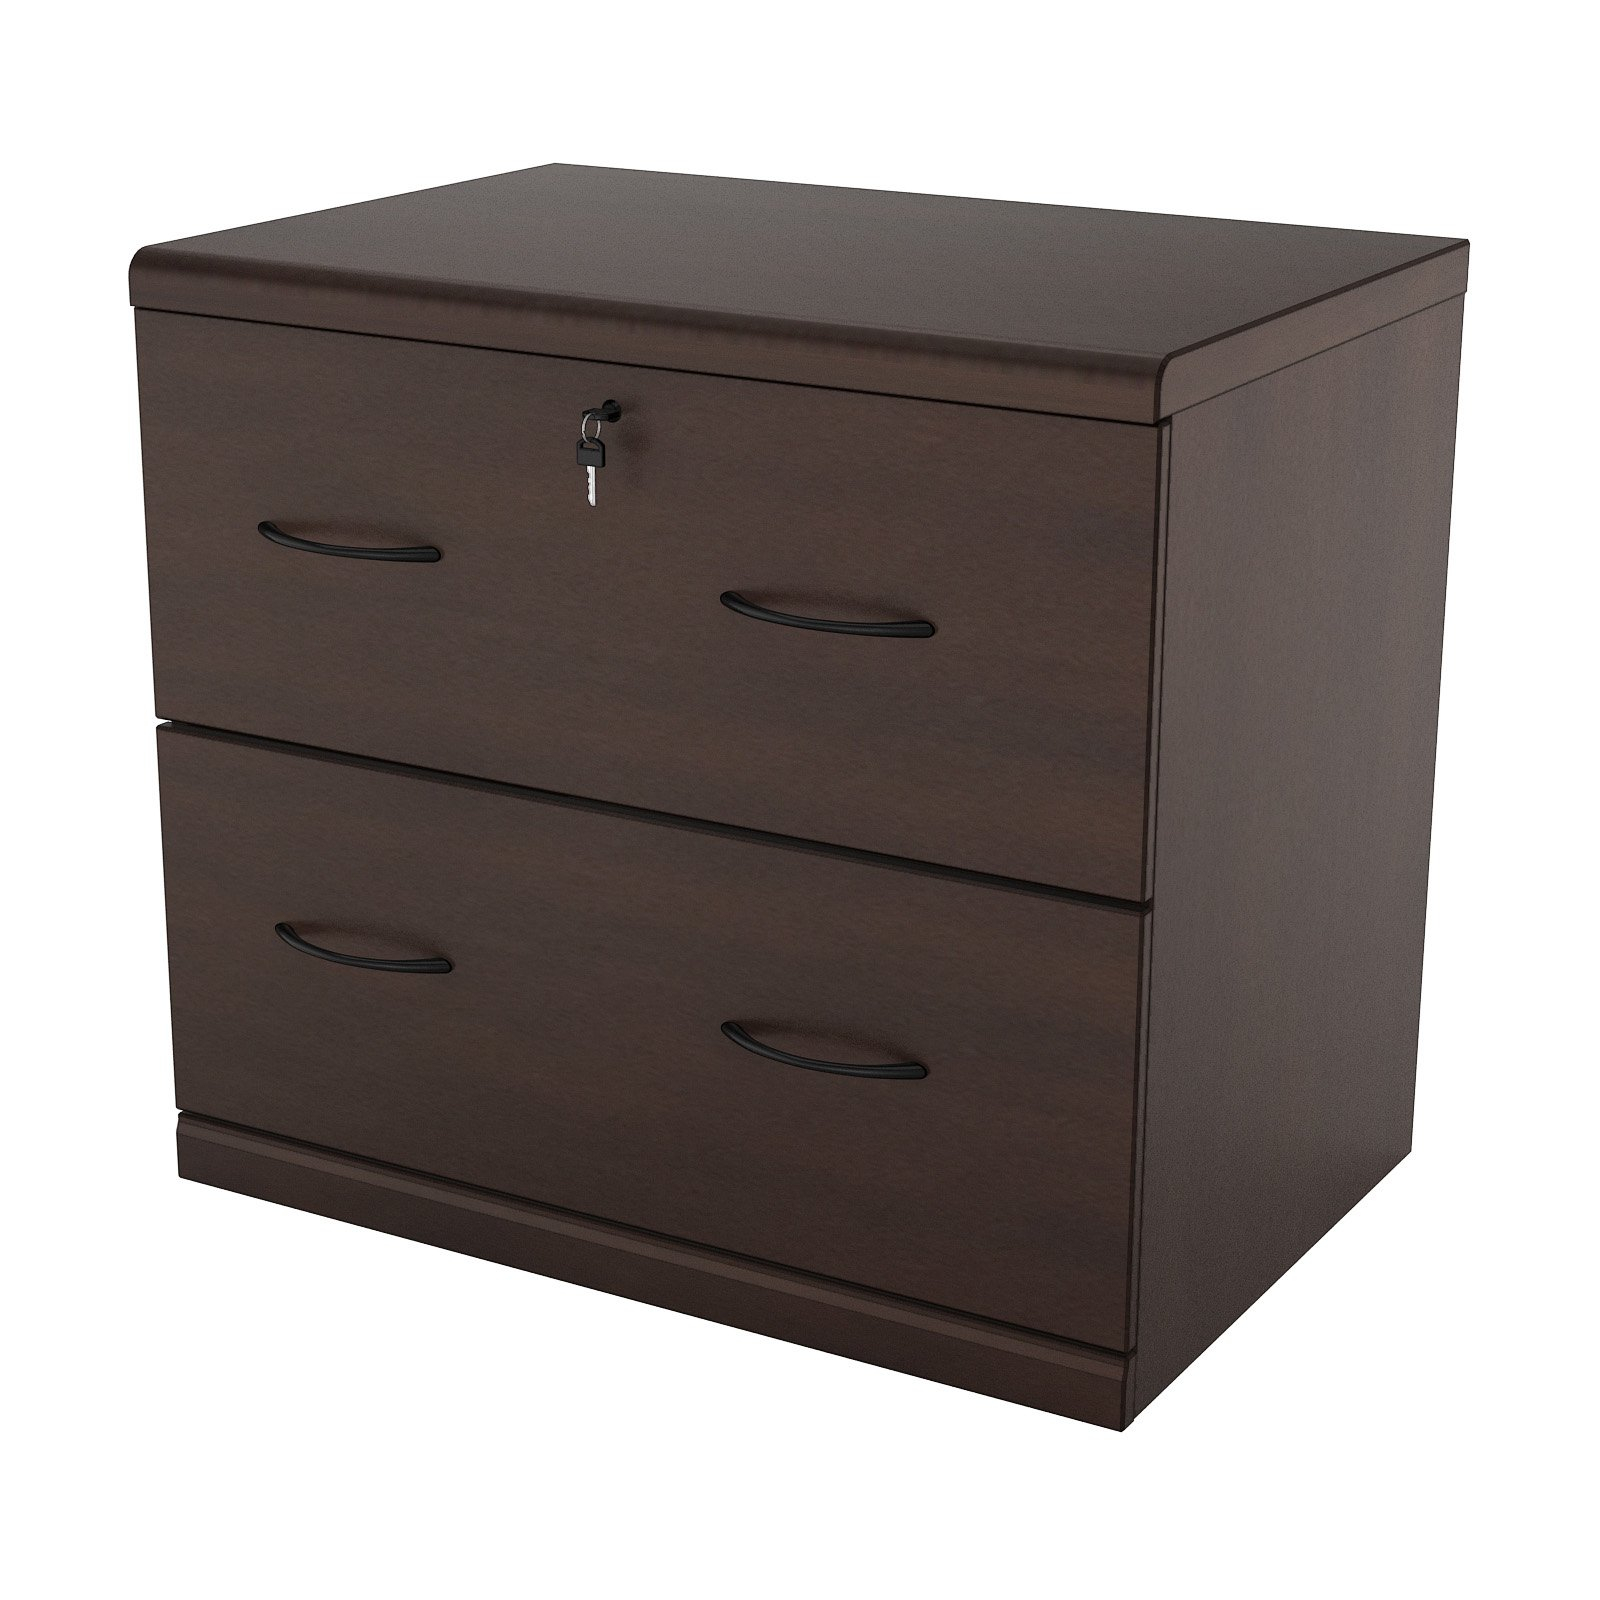 2 Drawer Lateral Wood Lockable Filing Cabinet Espresso Walmart for proportions 1600 X 1600